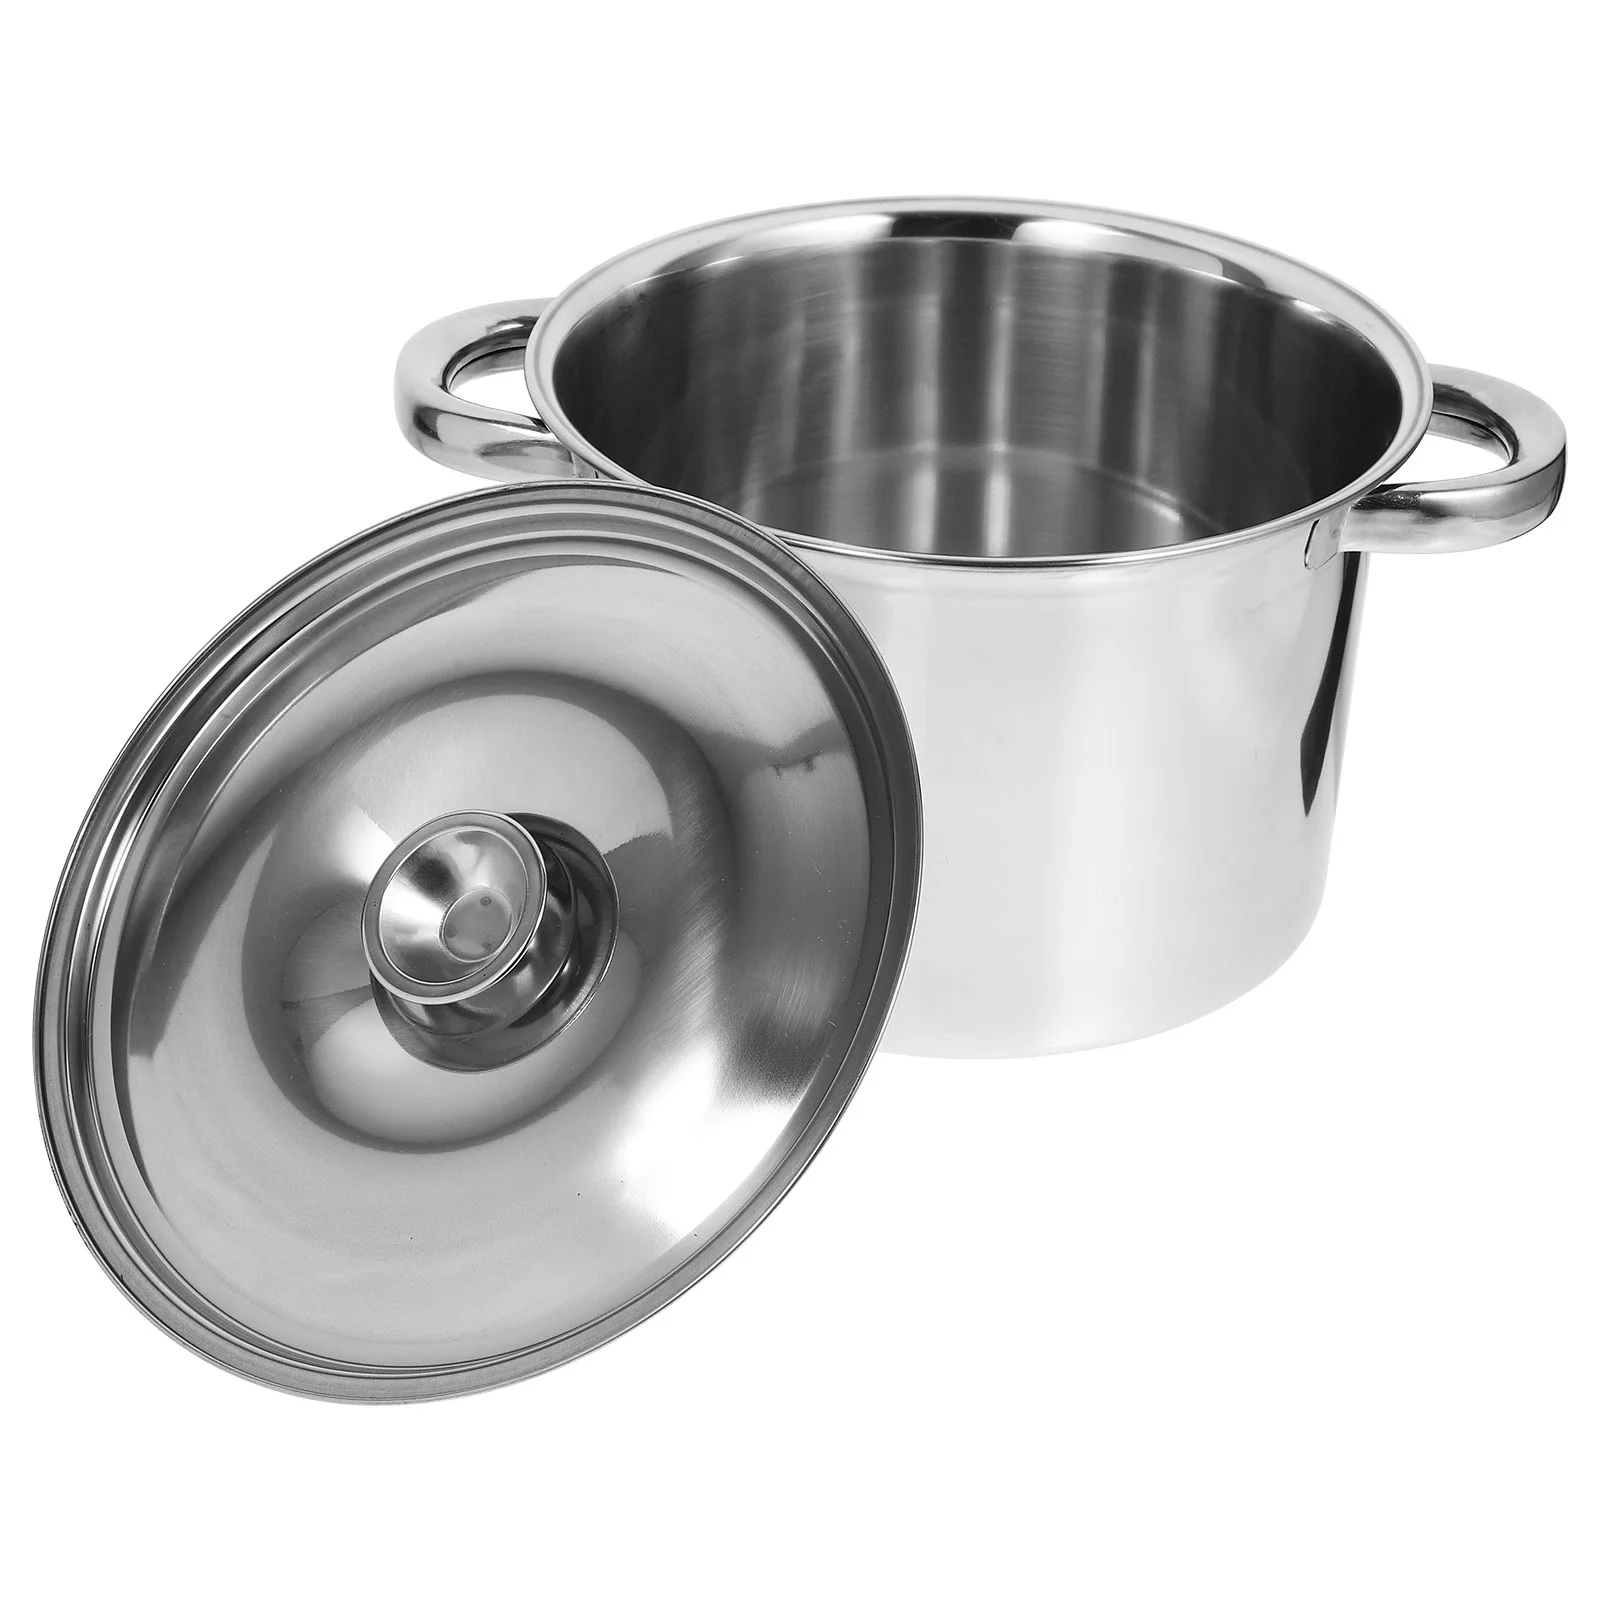 

Covered Stockpot Soup Cooking Thicken Metal Stainless Steel Induction Boiling Pan Cookware Kitchen Multipurpose